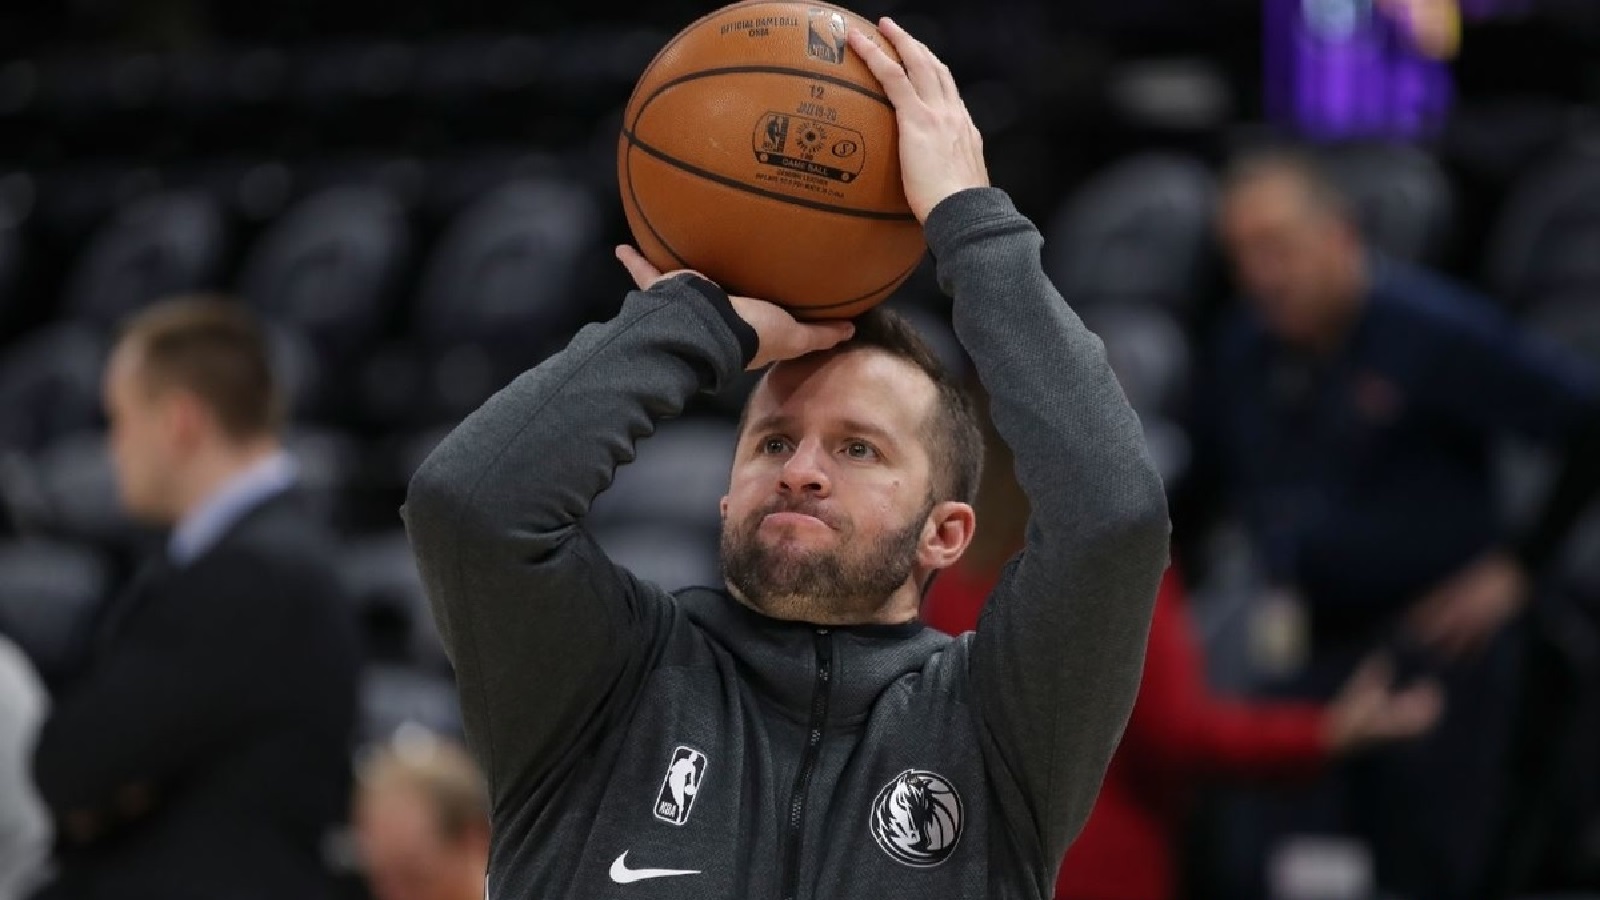 Fan favorite J.J. Barea is glad to be back home with Dallas